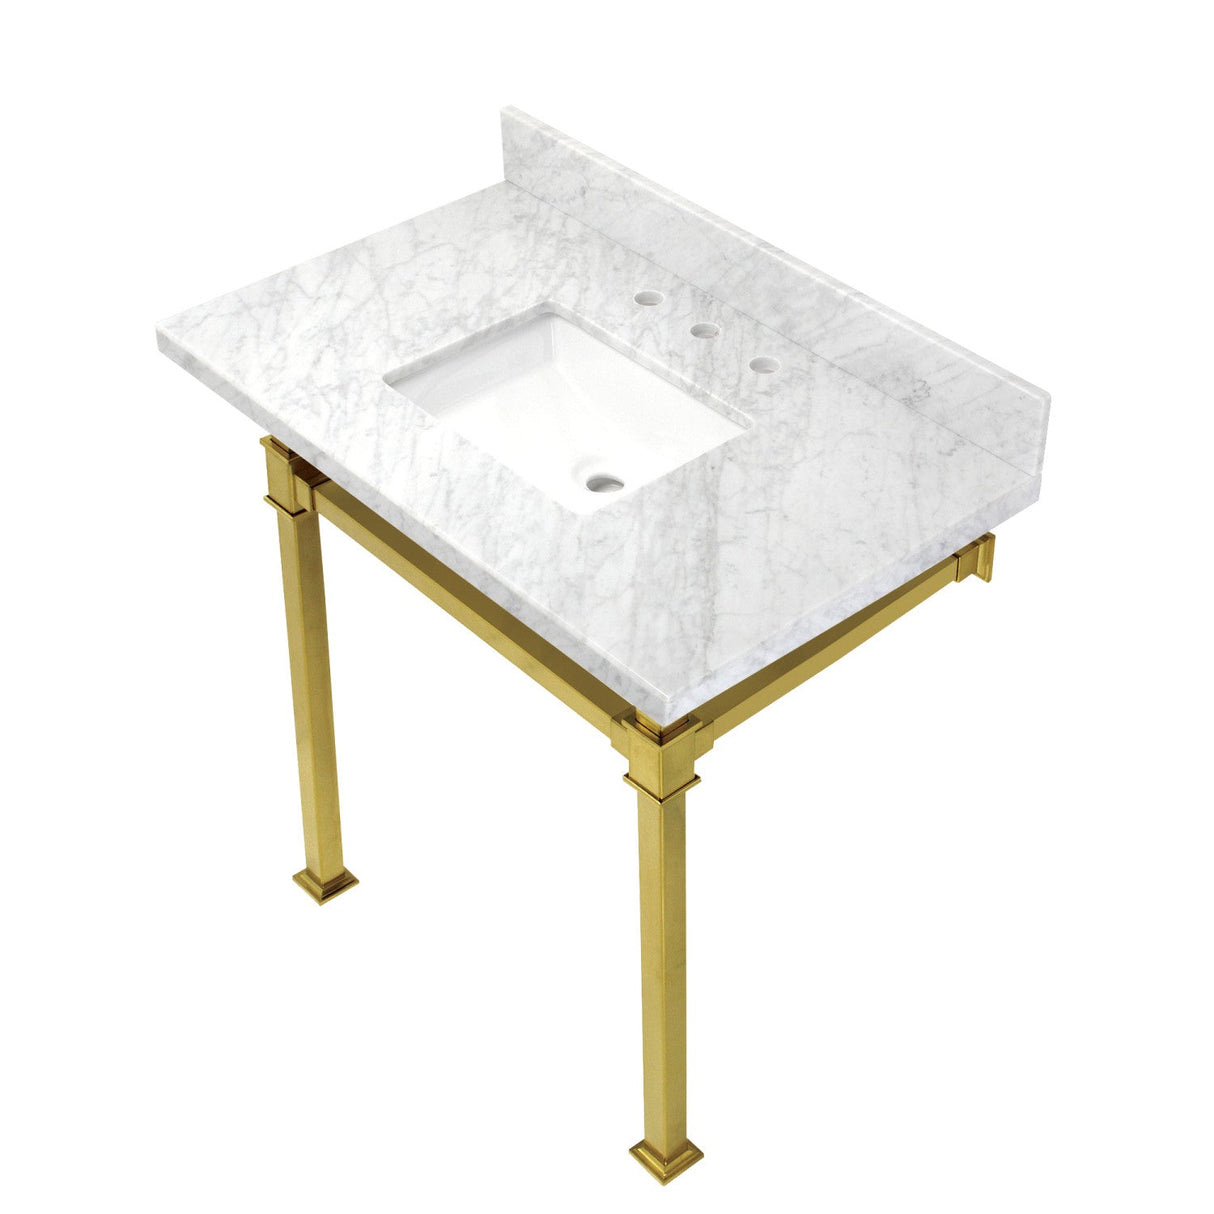 Fauceture KVPB36MSQ7 36-Inch Carrara Marble Console Sink, Marble White/Brushed Brass